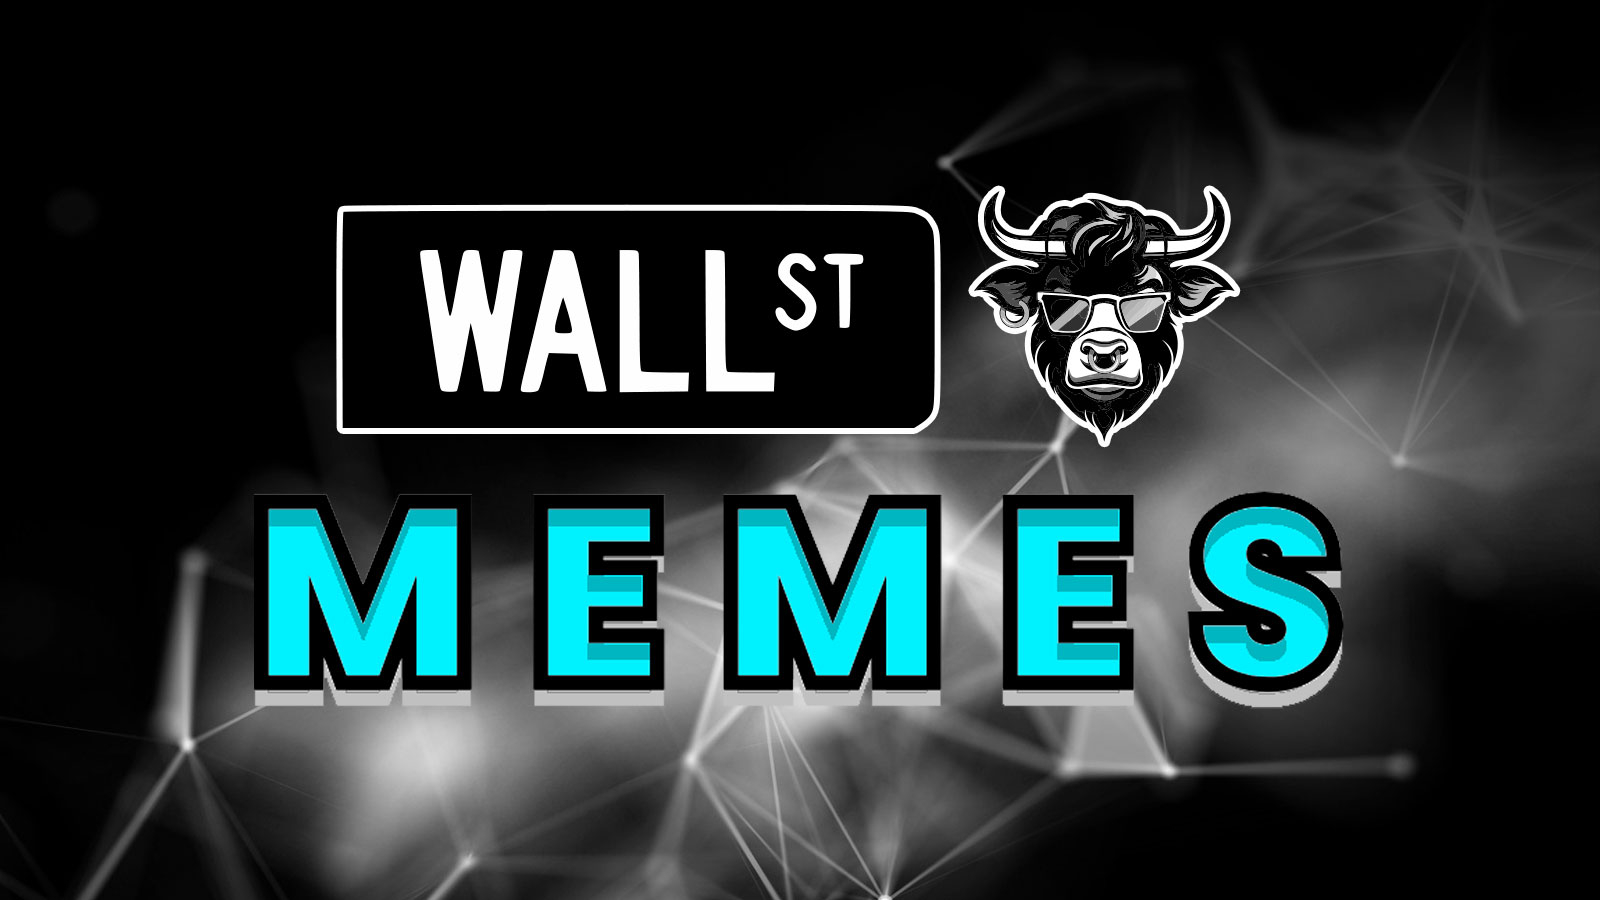 Wall Street Memes to Trade on OKX From Tuesday – The $30M Presale Hints at a Strong Meme Coin Pump